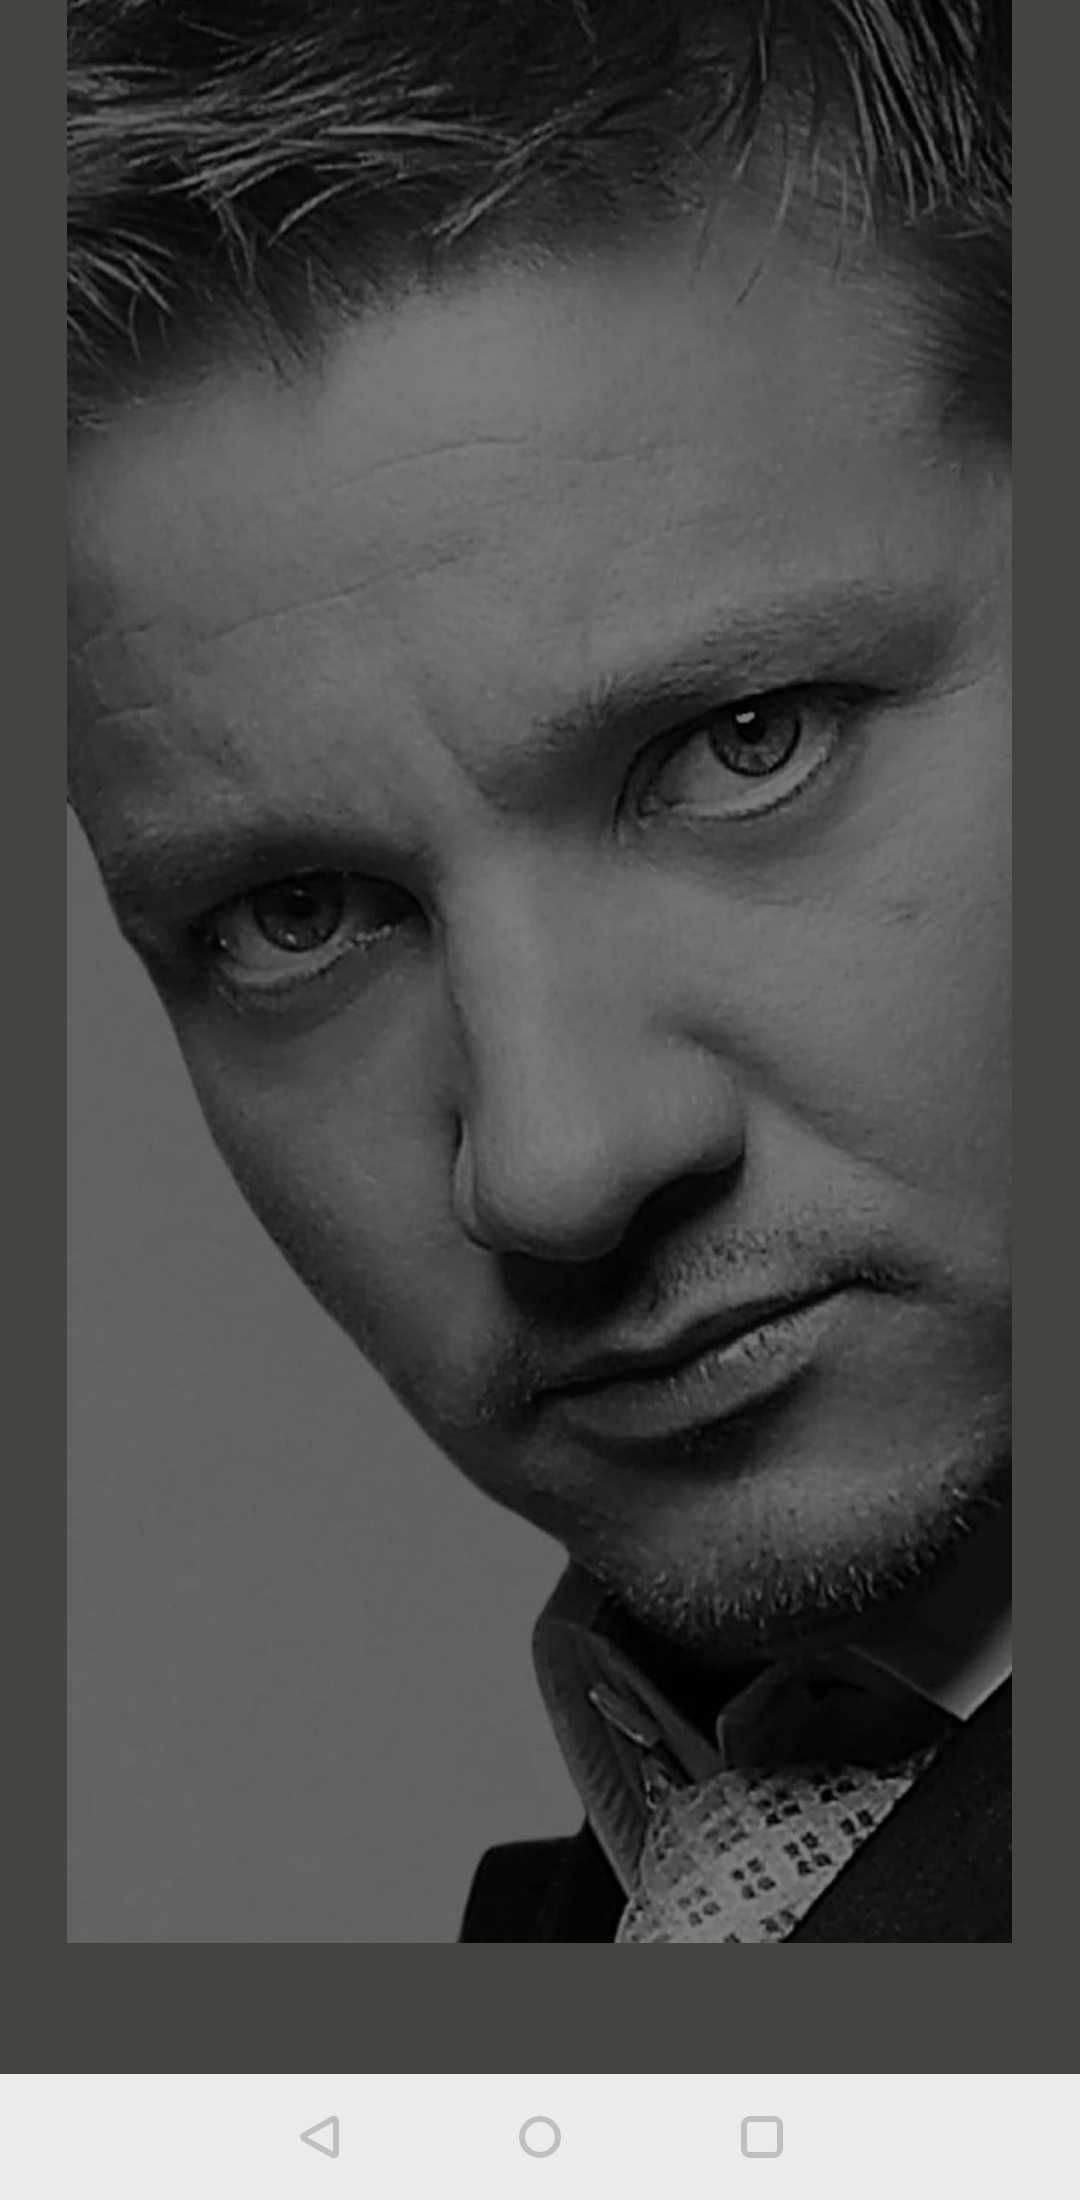 the loading screen of the Jeremy Renner app, featuring Jeremy Renner’s brooding face